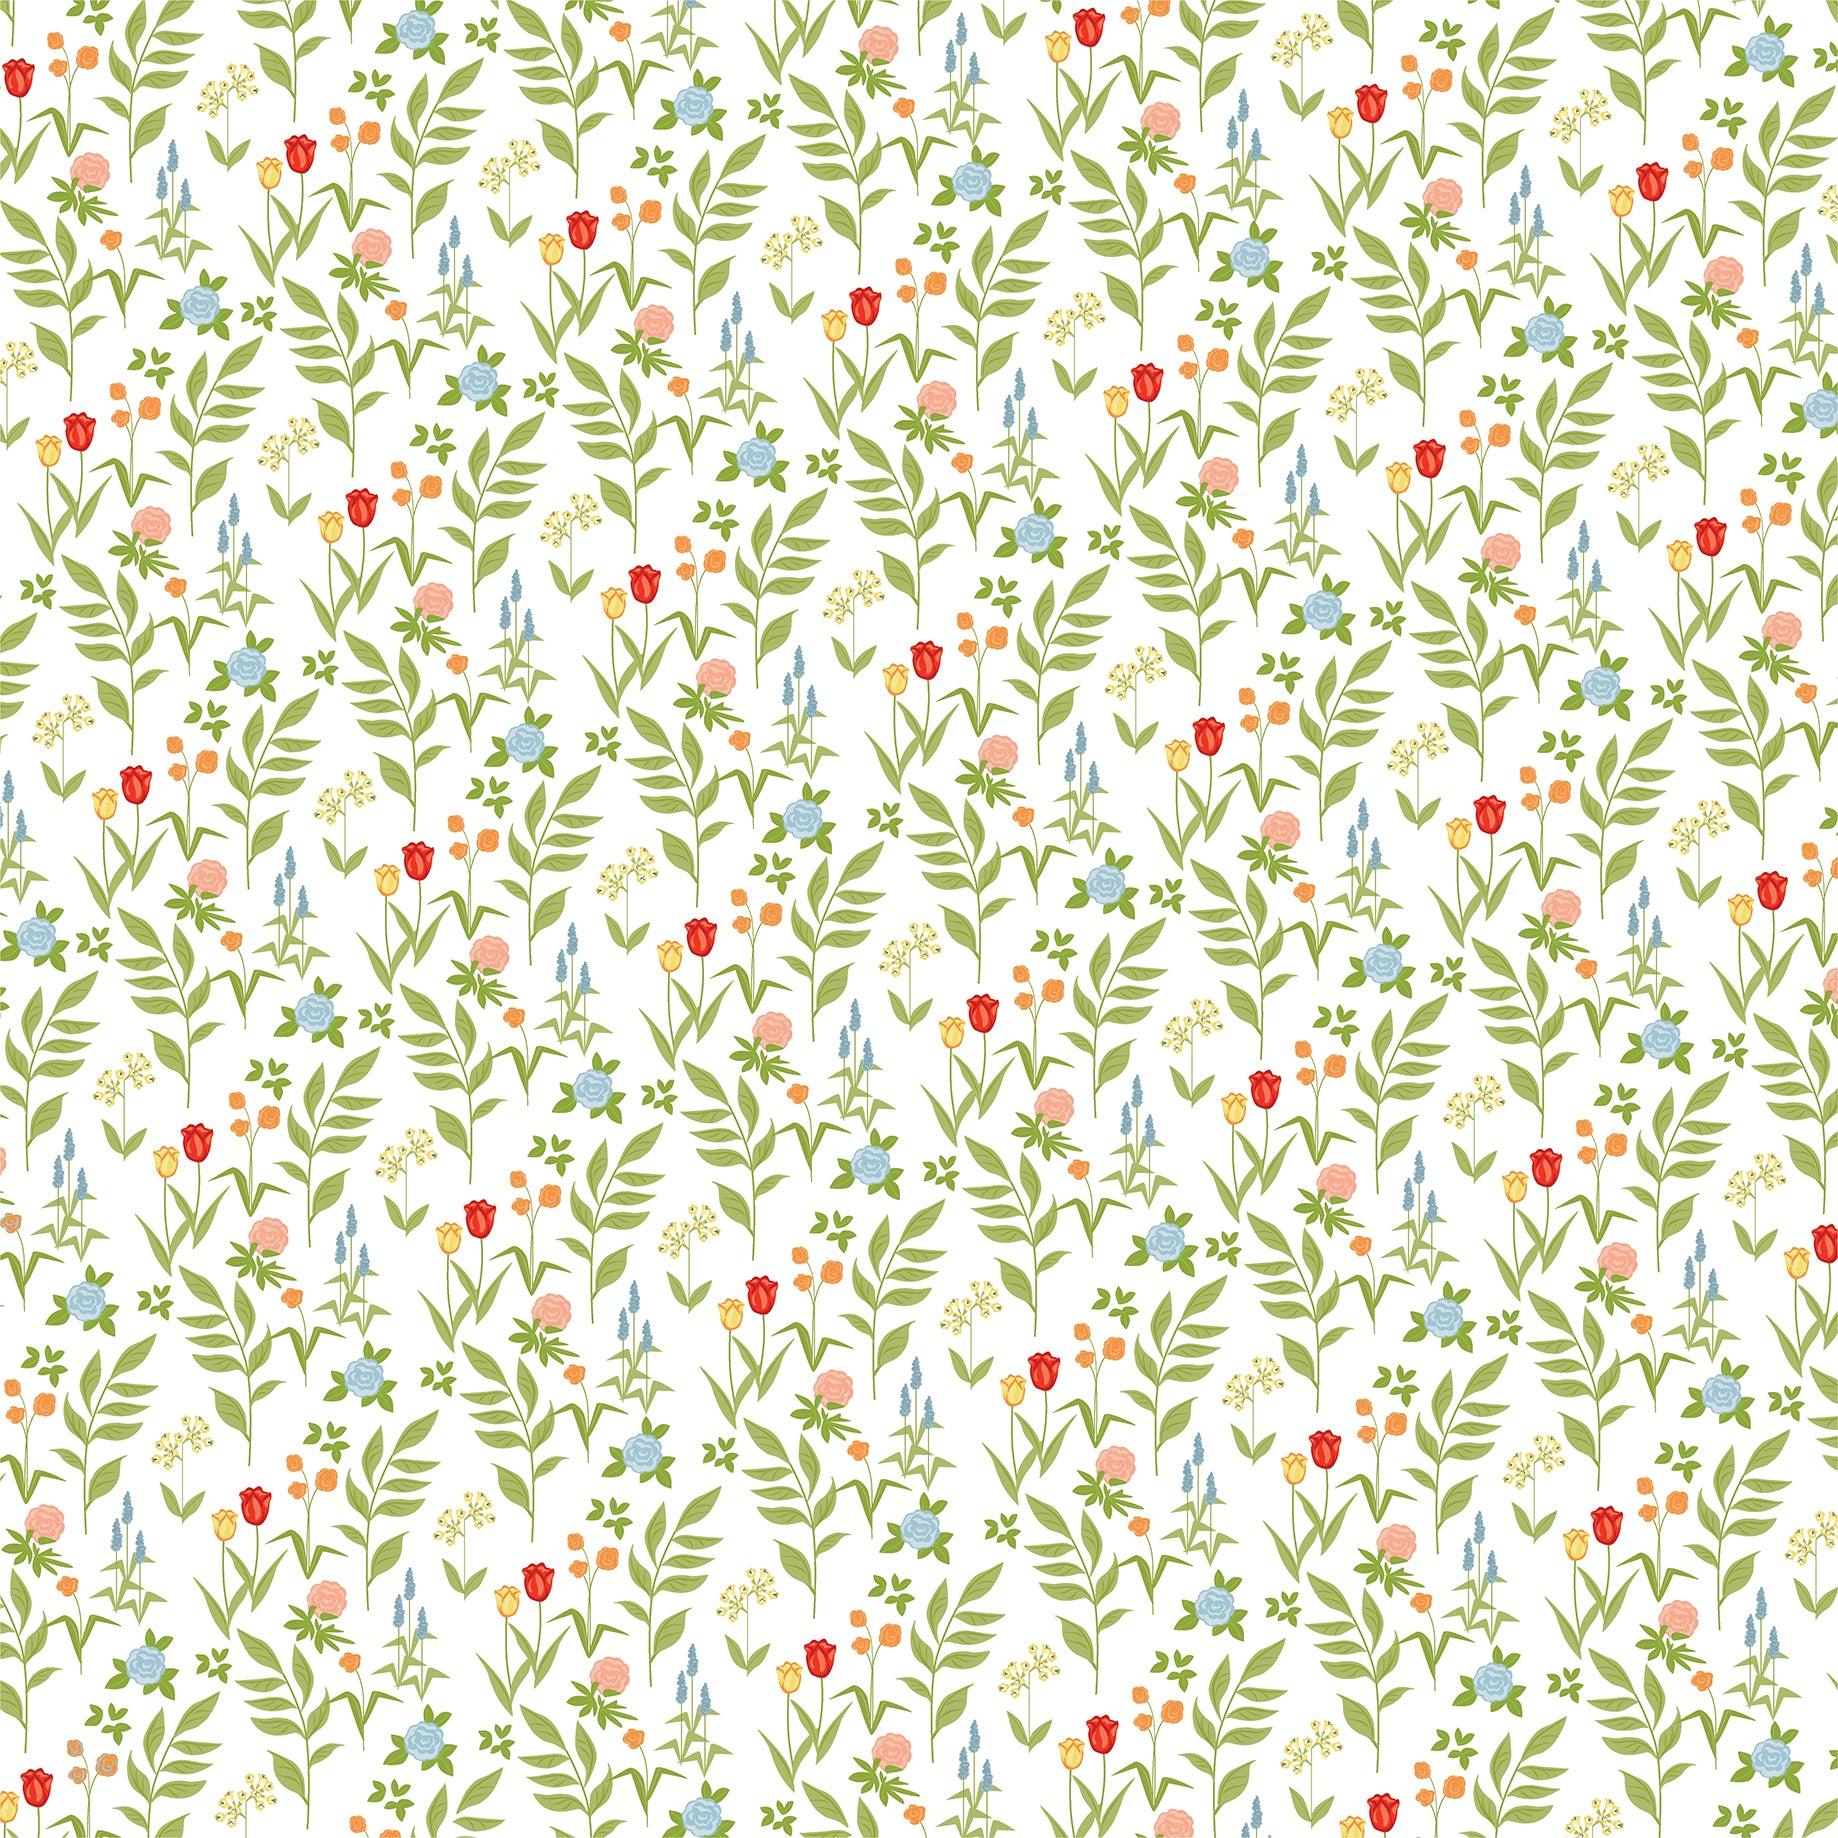 Farmhouse Living Collection Farmhouse Floral 12 x 12 Double-Sided Scrapbook Paper by Carta Bella - Scrapbook Supply Companies